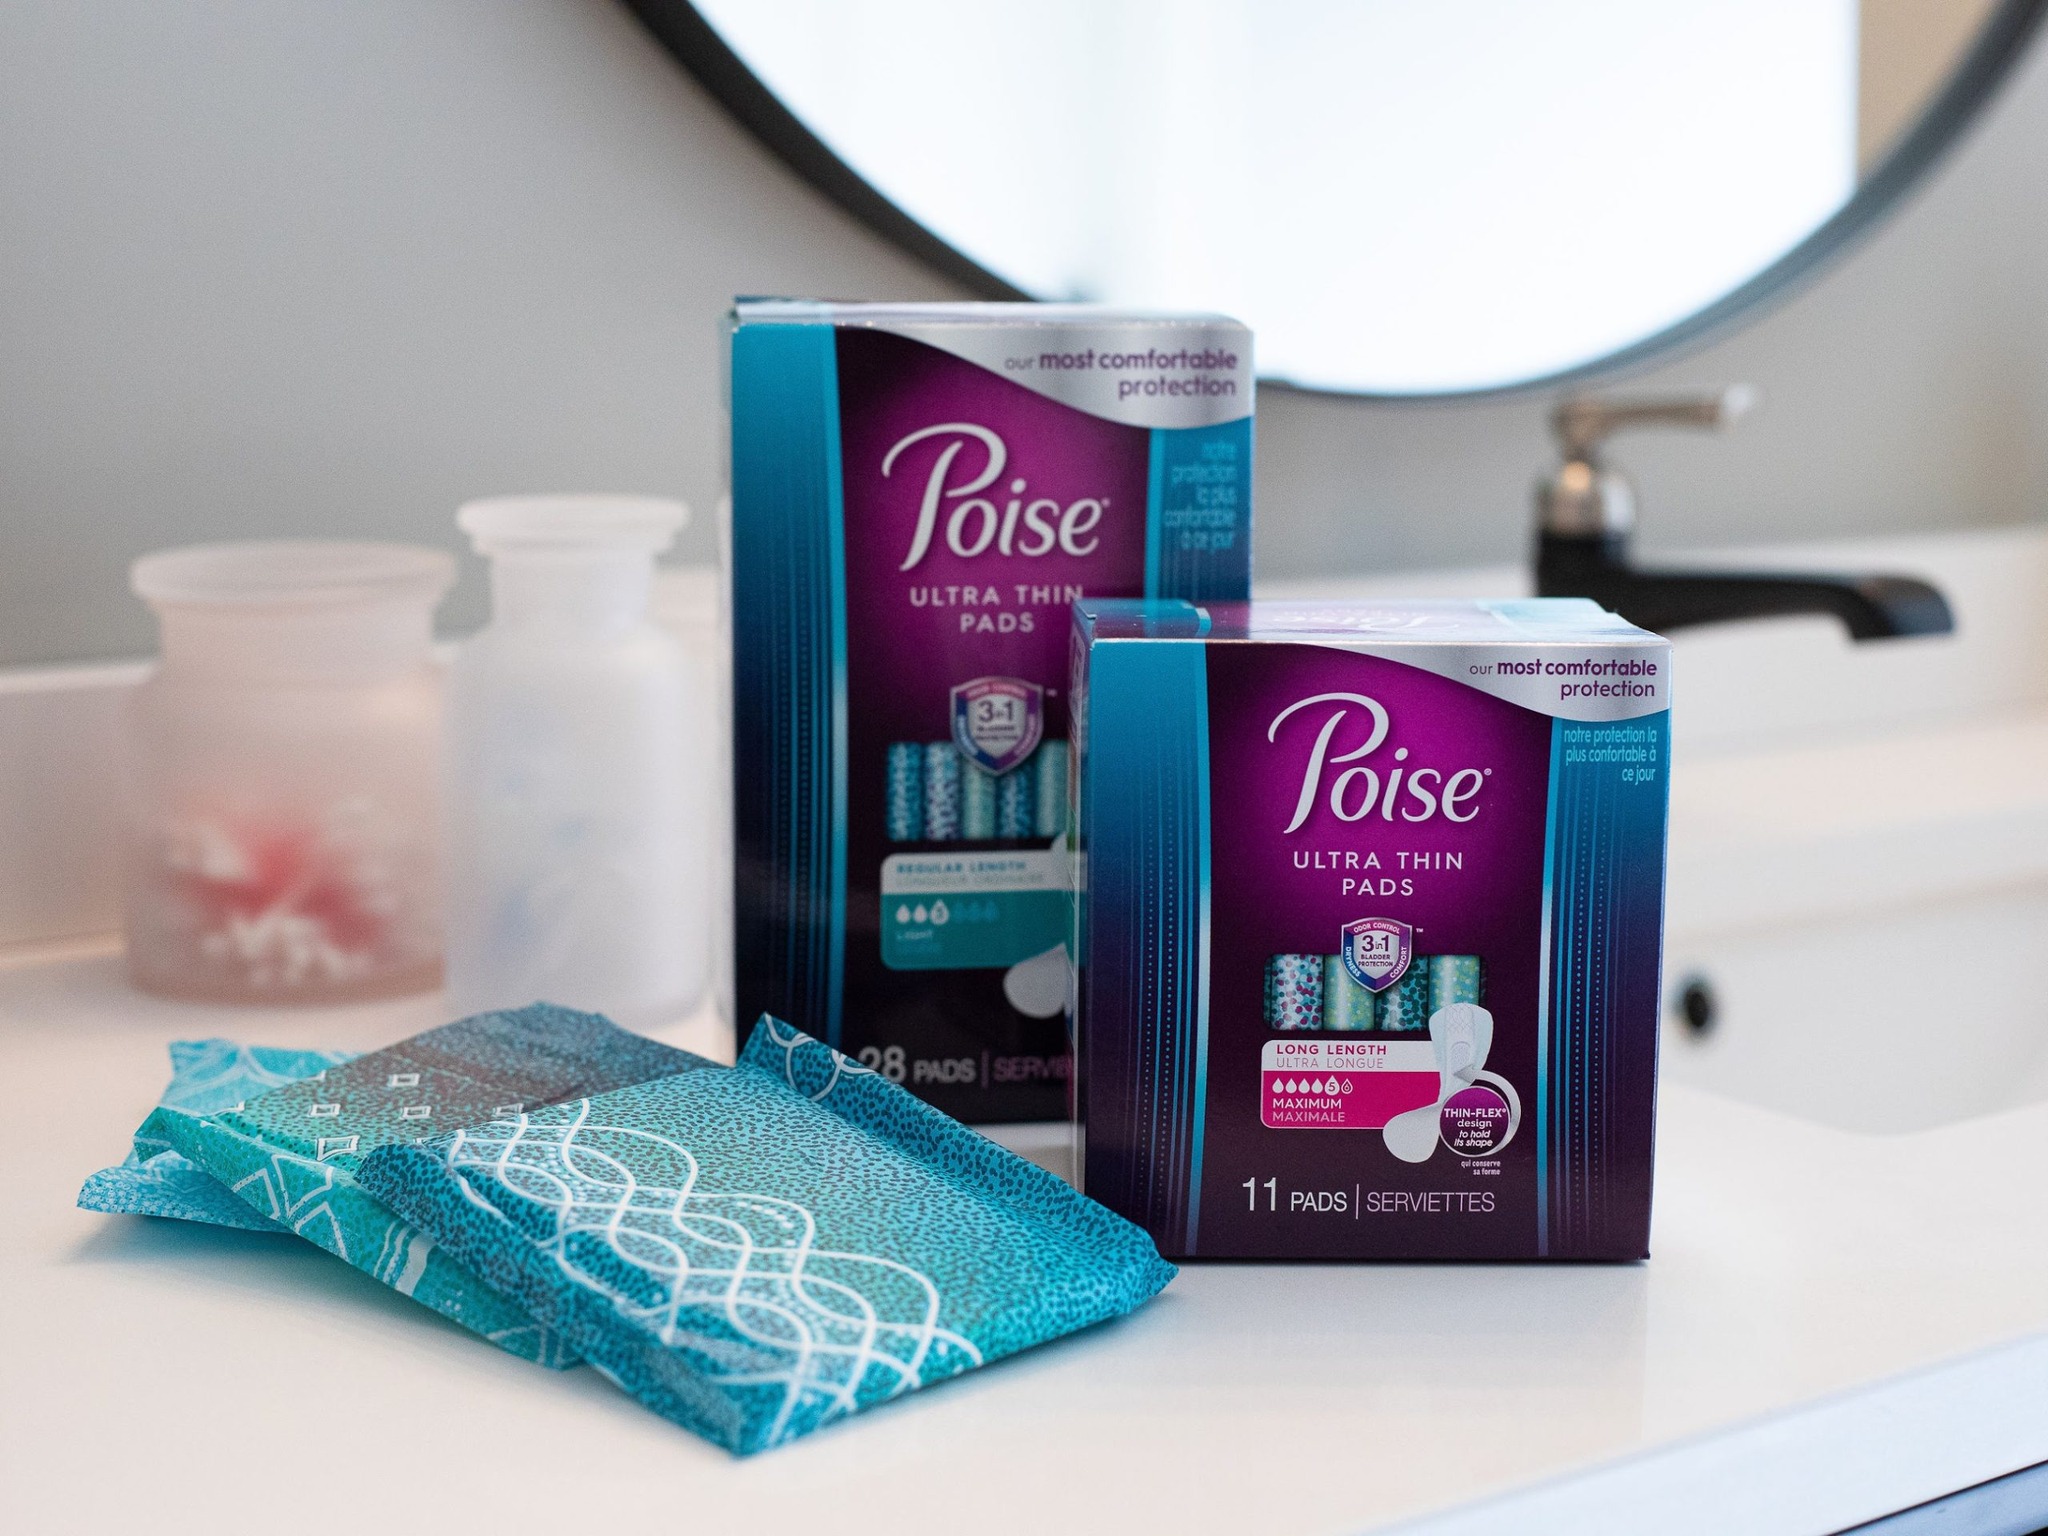 Poise Pads As Low As $3.89 At Publix (Regular Price $8.39